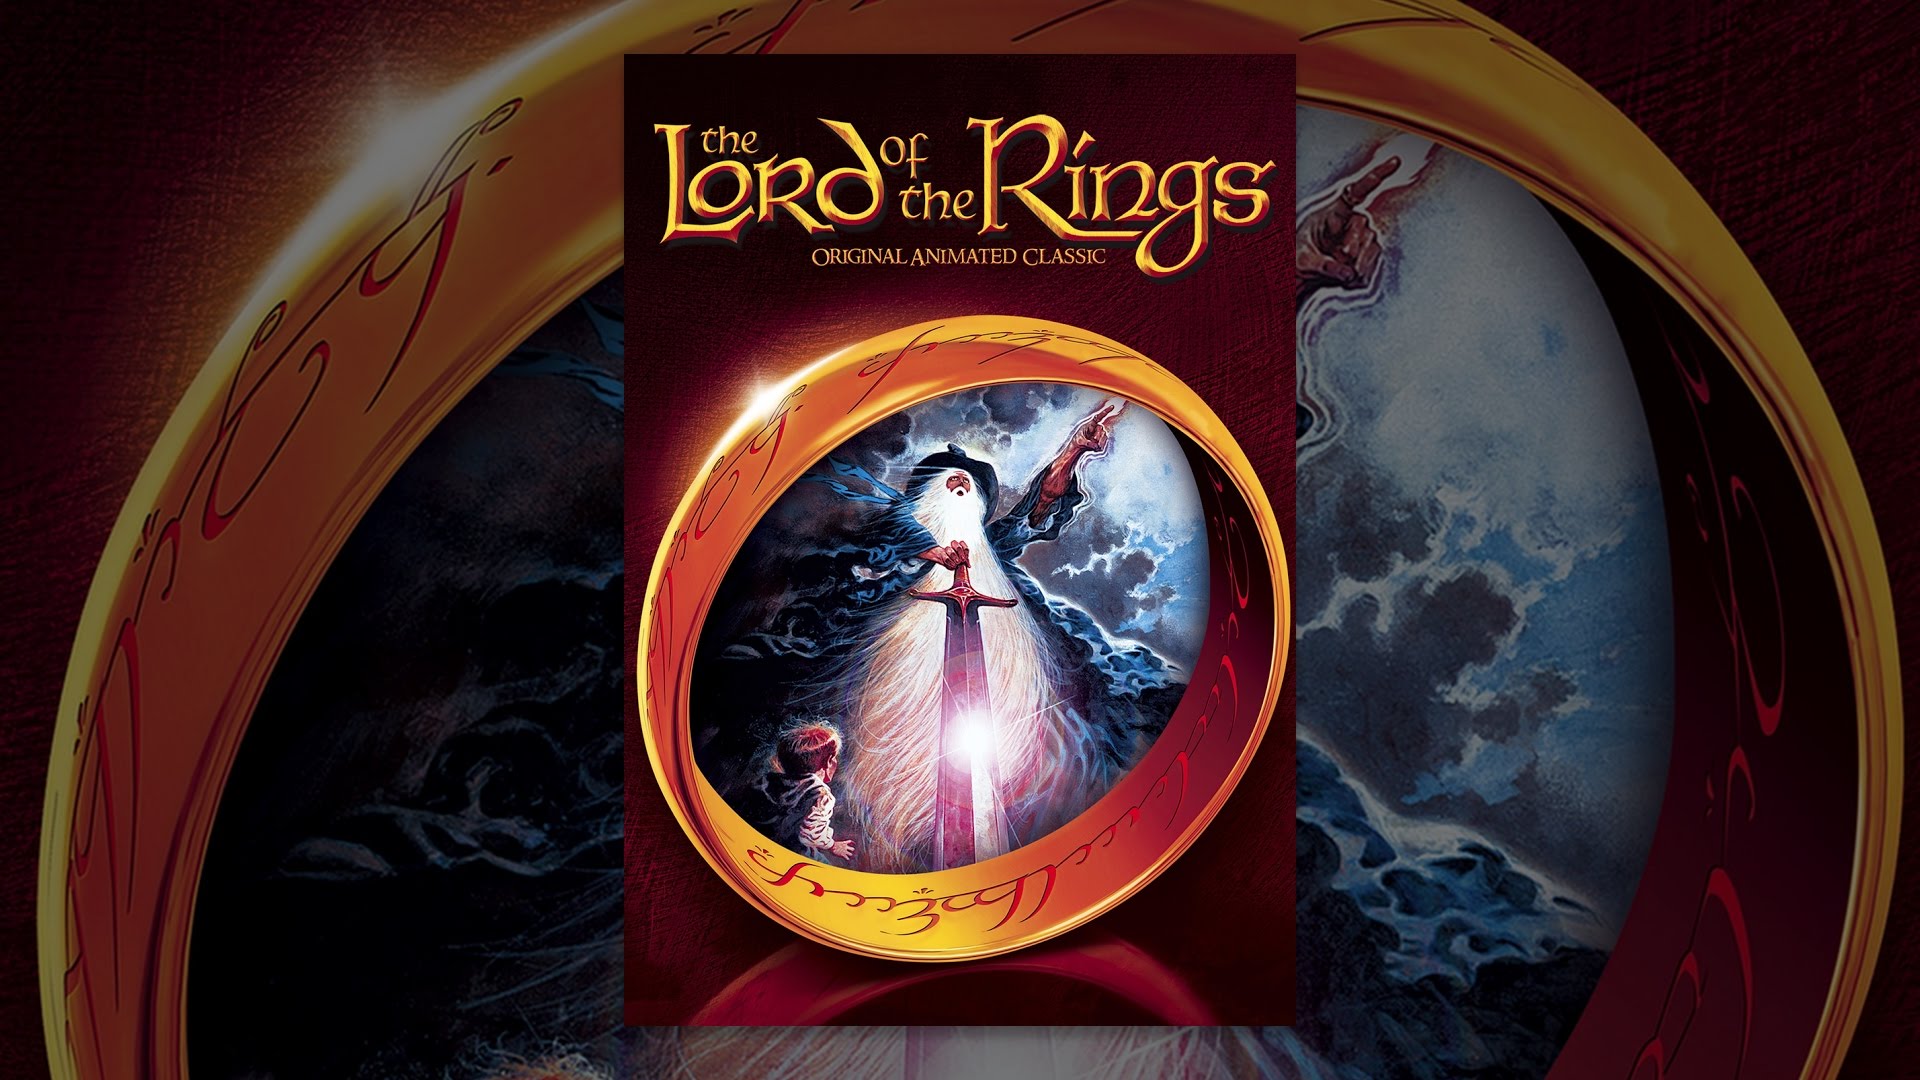 The Lord of the Rings (1978 film) - Wikipedia